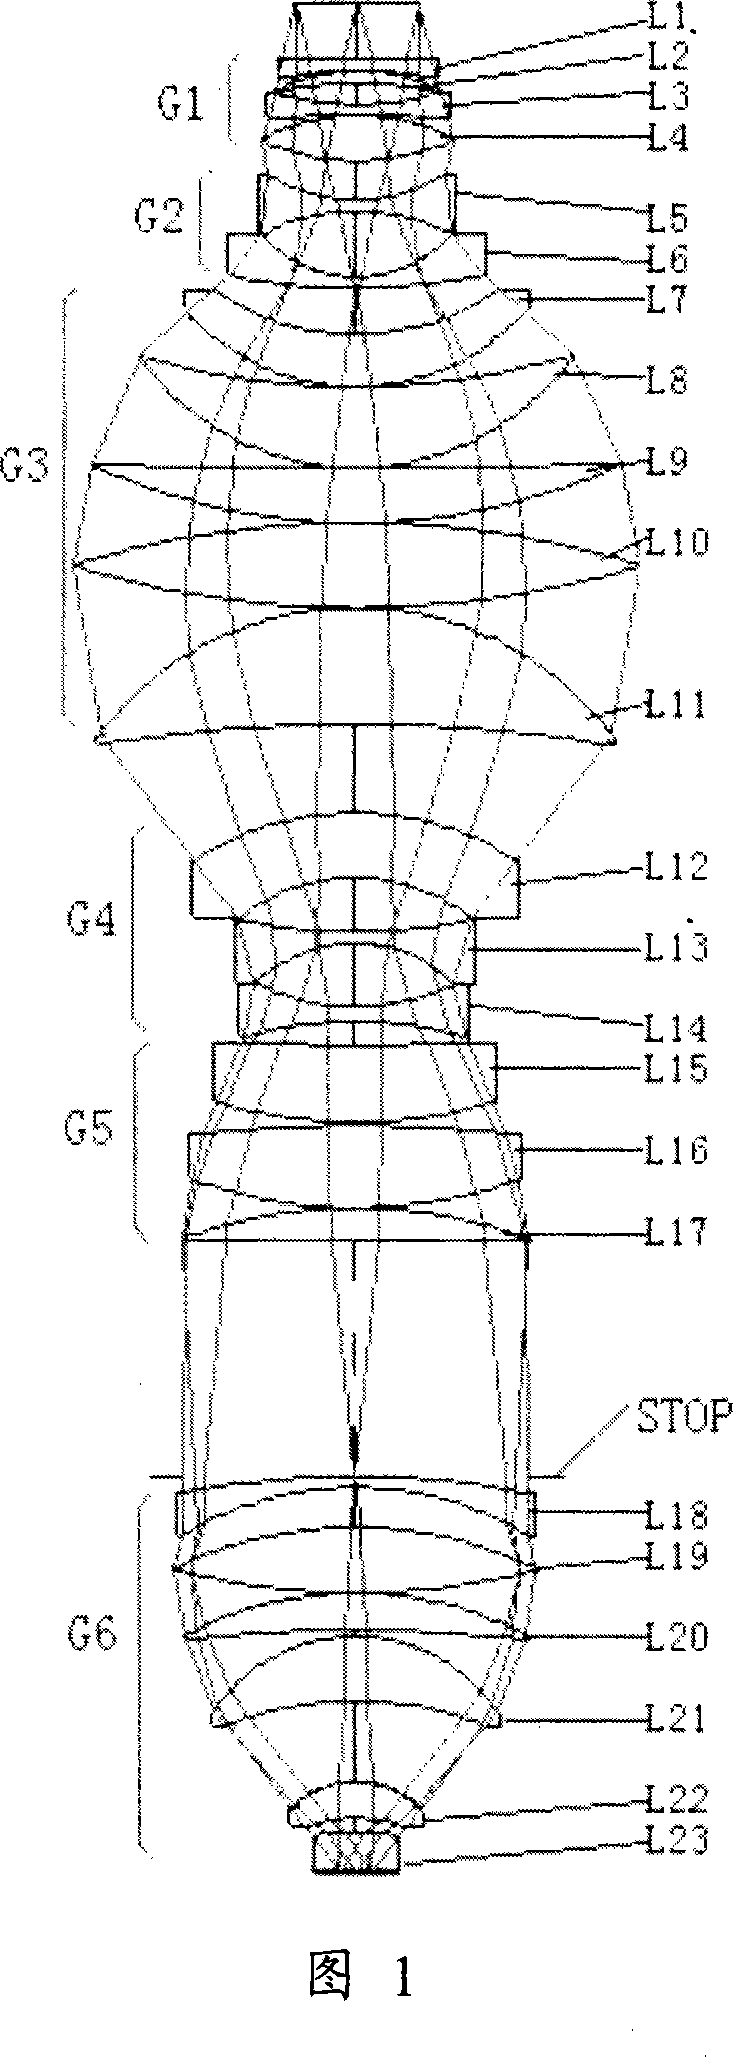 All-refraction immersion type projection and optical system, device and its uses